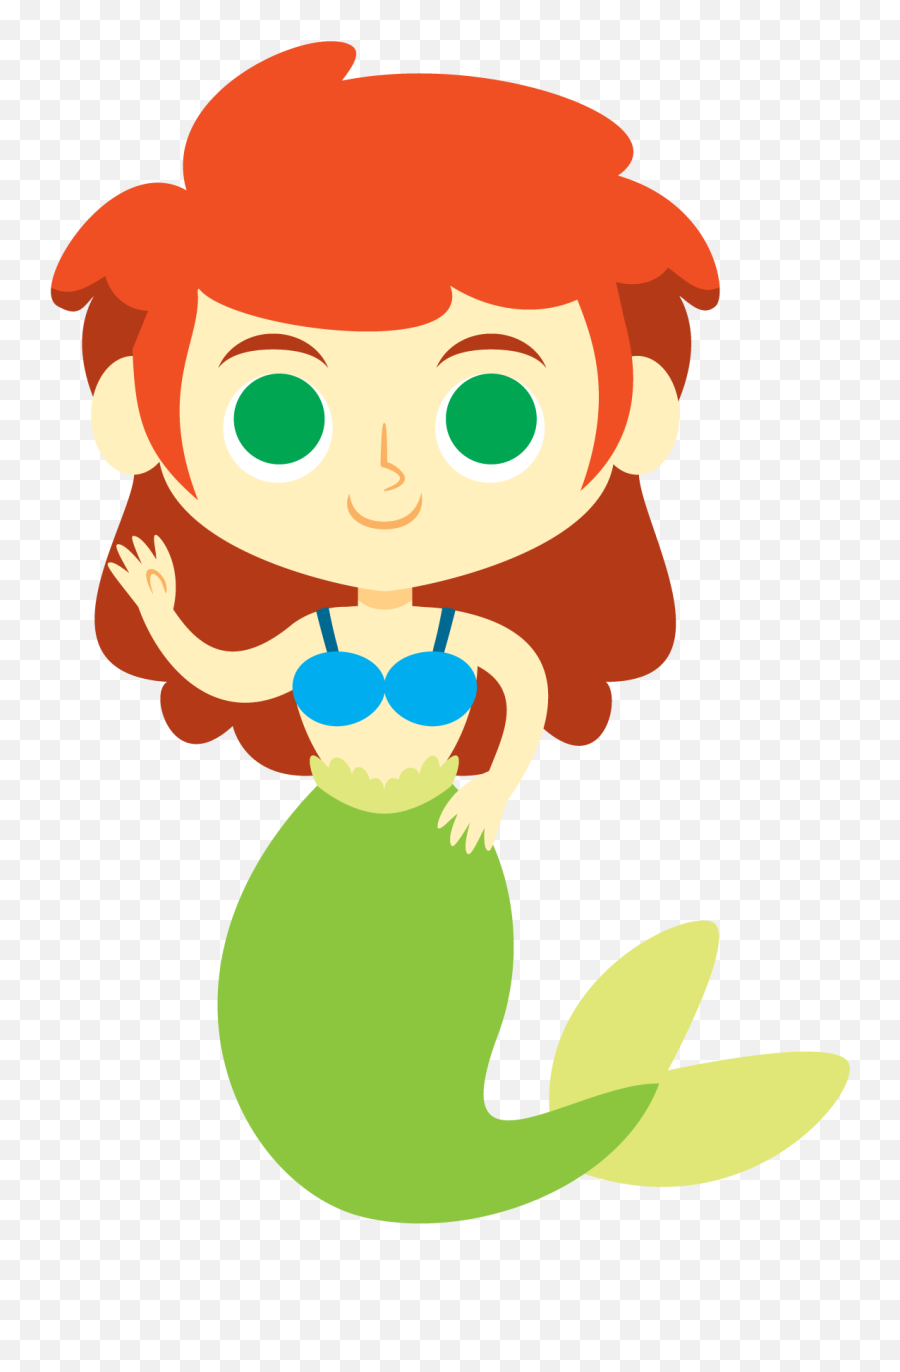 Free Mermaid Clipart Png Images - Ugly Mermaid Clipart Transparent Emoji,Mermaid Swimming Animated Emoticon